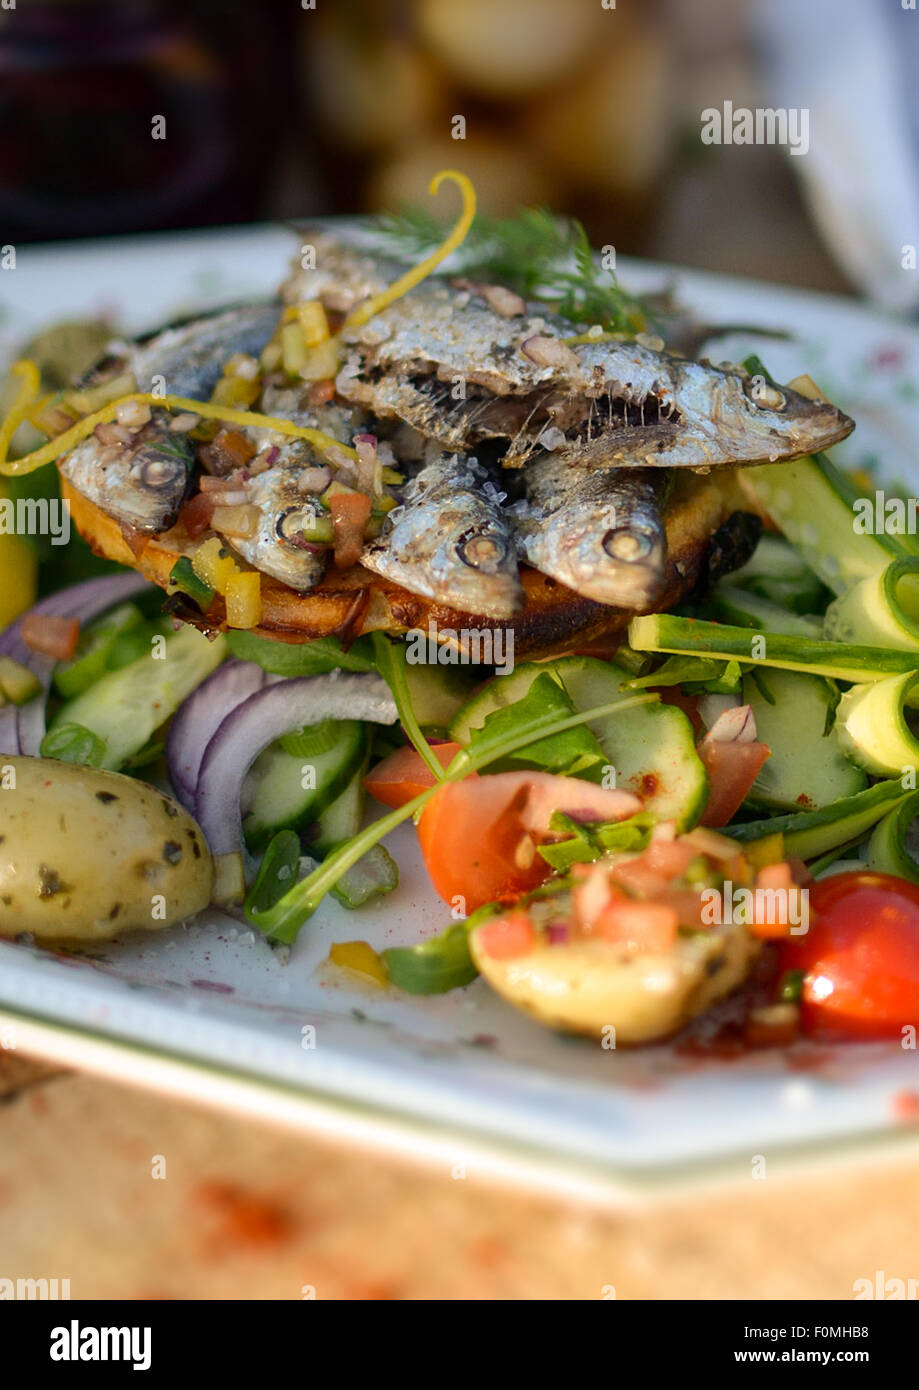 Sardines fish cooked food,  cooked, meal, grilled, lunch, cuisine, healthy, seafood, gourmet, fresh, sardine, plate, Mediterrane Stock Photo